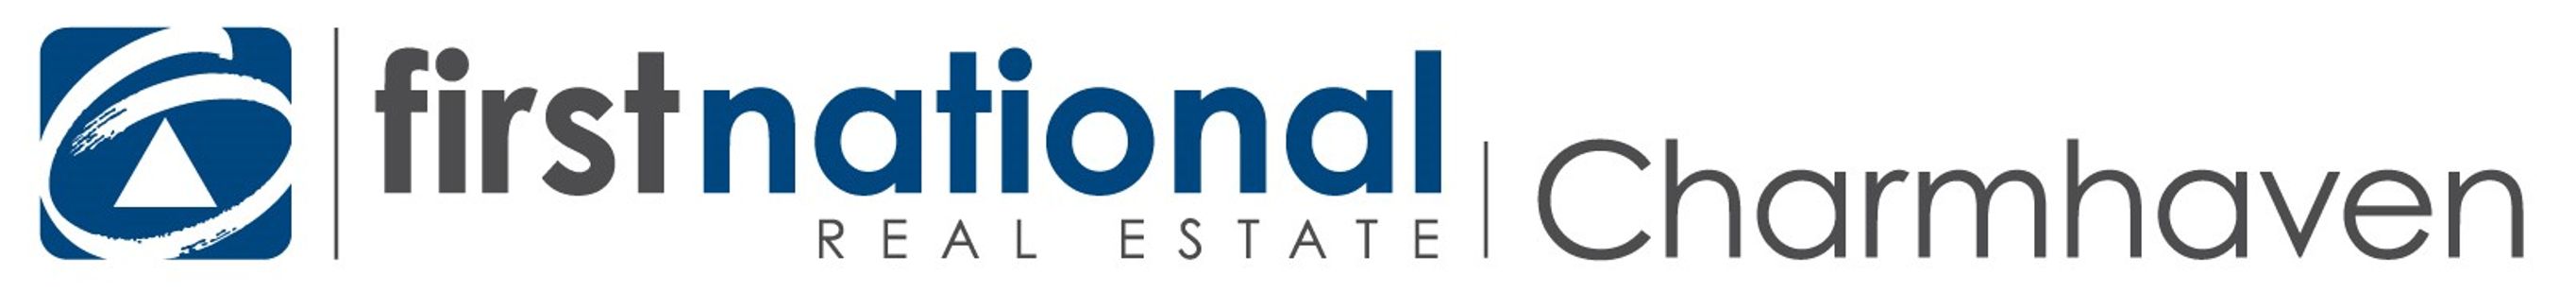 First National - Charmhaven  - Real Estate Agency